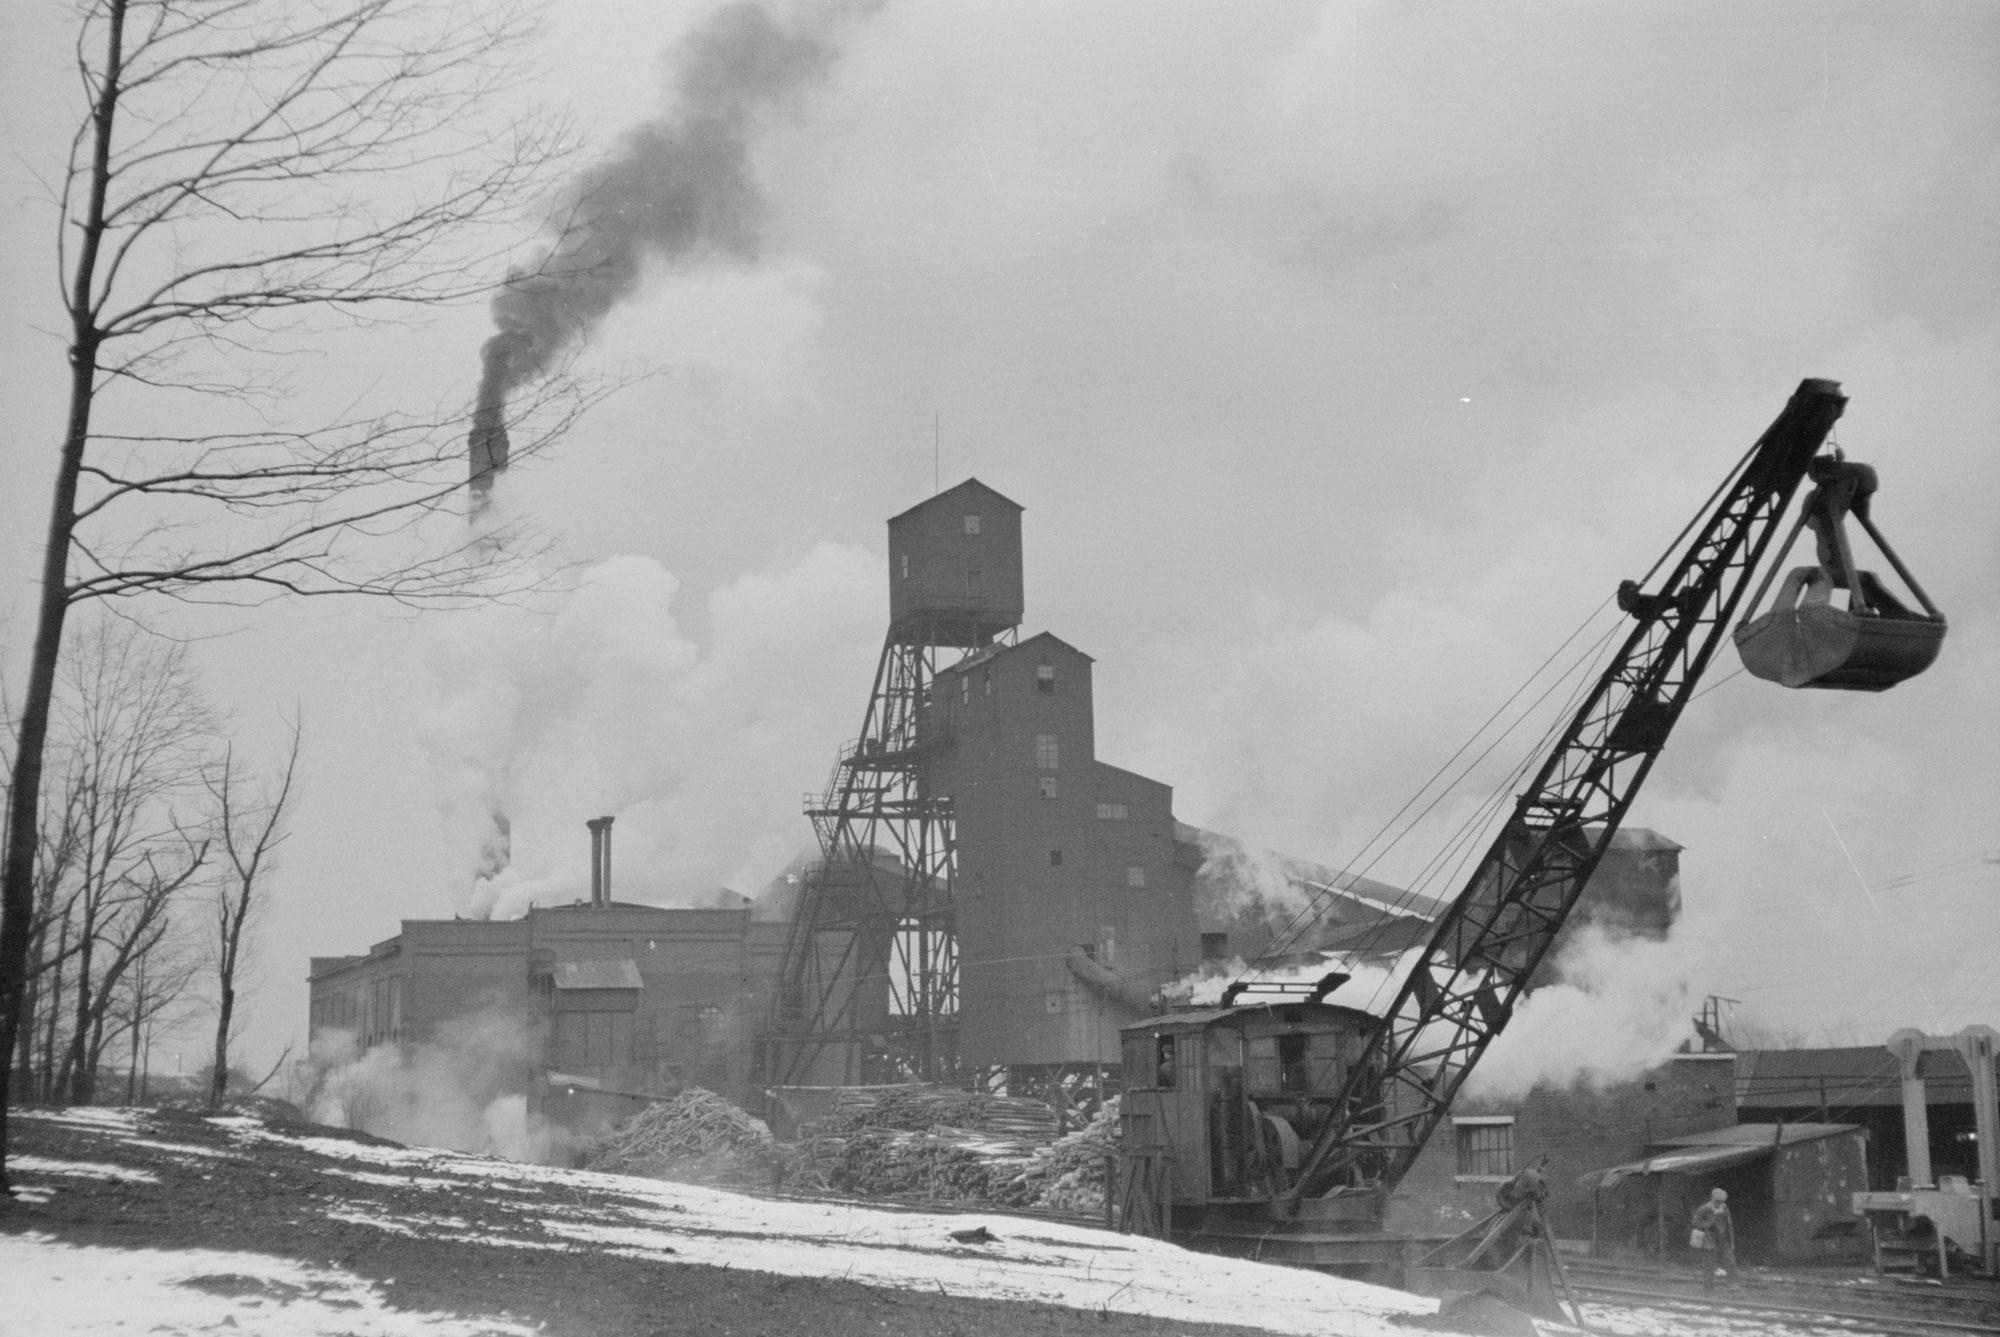 Black and white photo of Orient Mine No. 1 in Franklin County, Illinois, in 1939. The photo shows a a tall, possibly wooden structure in the background, in front of another building from which smokestacks are belting dark gray and white smoke. There is a large pile of logs in front of the building, and in the foreground in a large dragline excavator. Other building can be seen at right, with two people walking in front of them. The trees at right are barren of leaves and the ground has snow on it, indicating that it is winter.